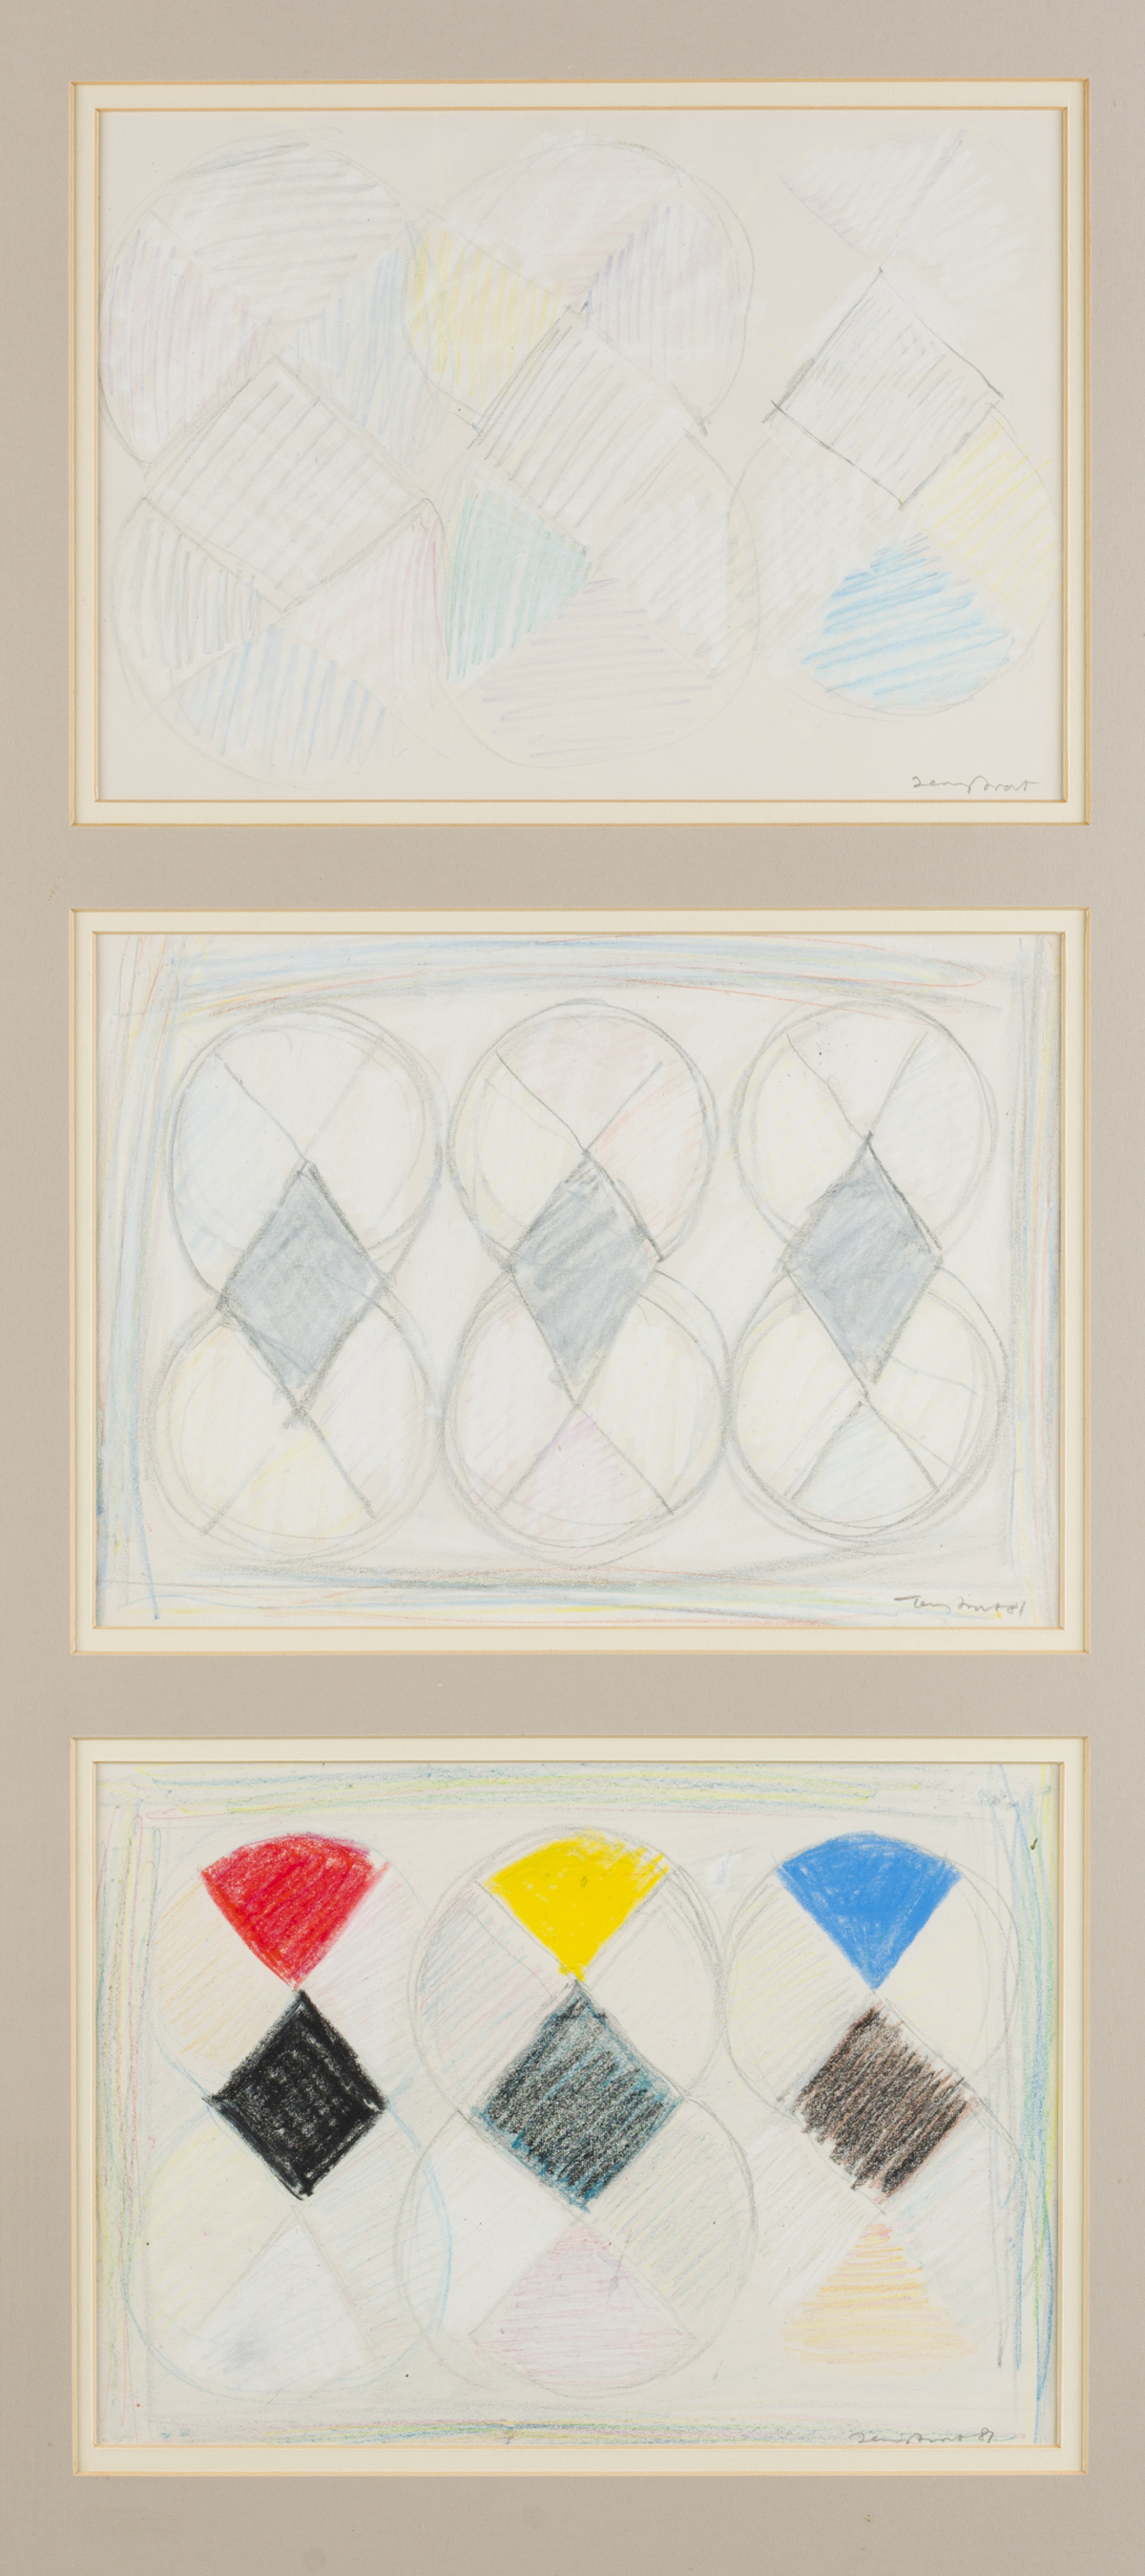 Three Drawings for White Out (1981), Pencil and Pastel on Paper, Each one is 19 x 27cm